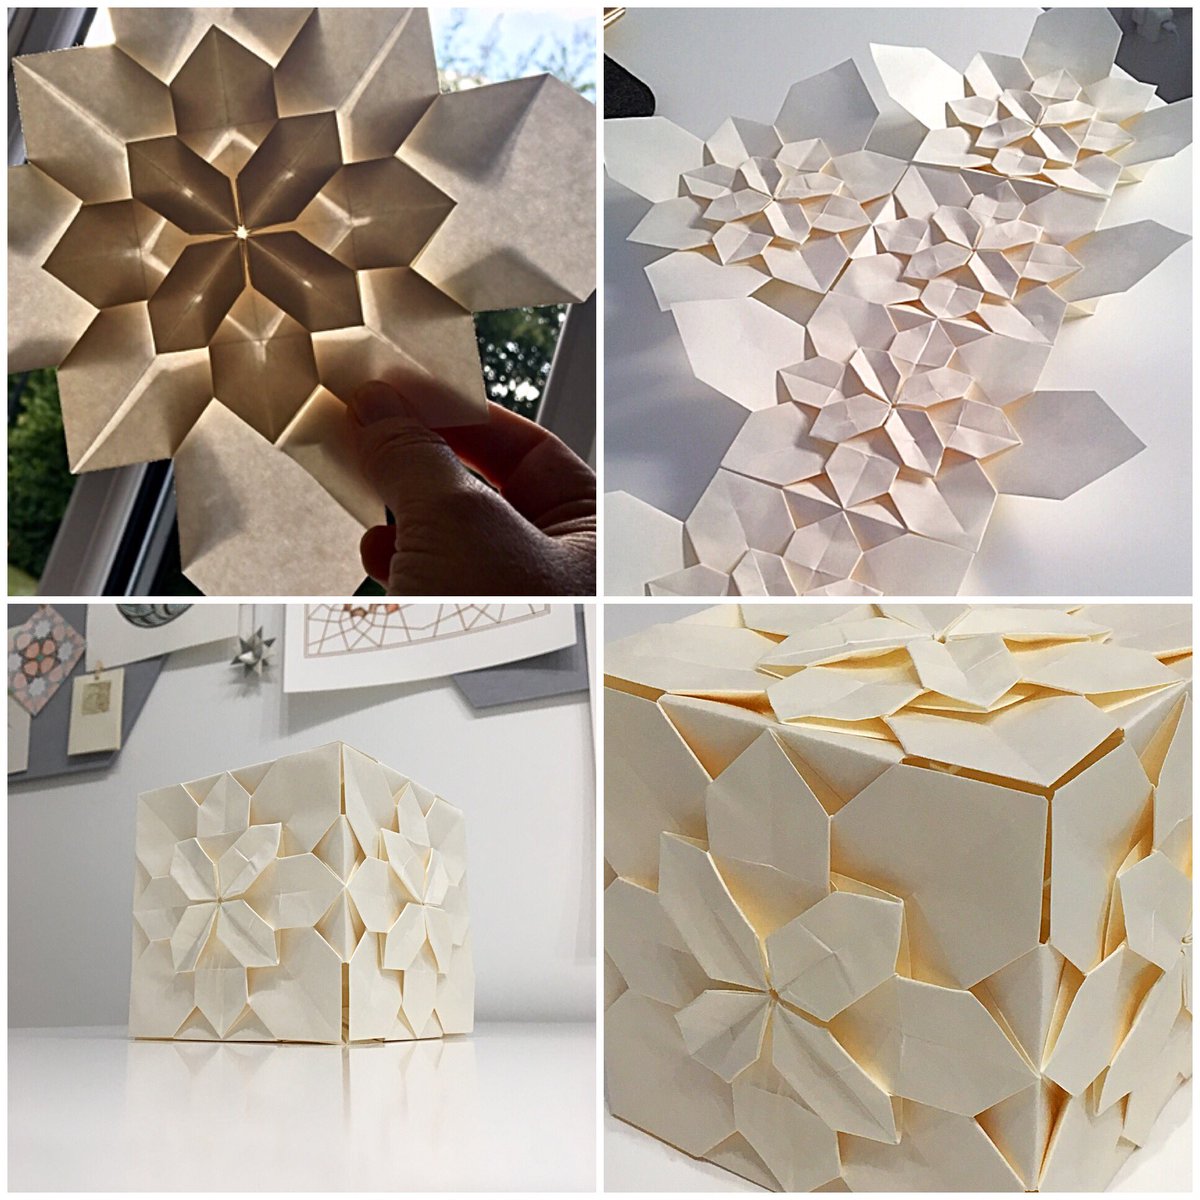 10b) Experienced origamists might wish to try the challenging, but oh-so-stunning, Shuzo Fujimoto Hydrangea cube lamp.I used  @happyfolding’s video instructions for the modules  & this video for the construction  #3DMaths  #Origami